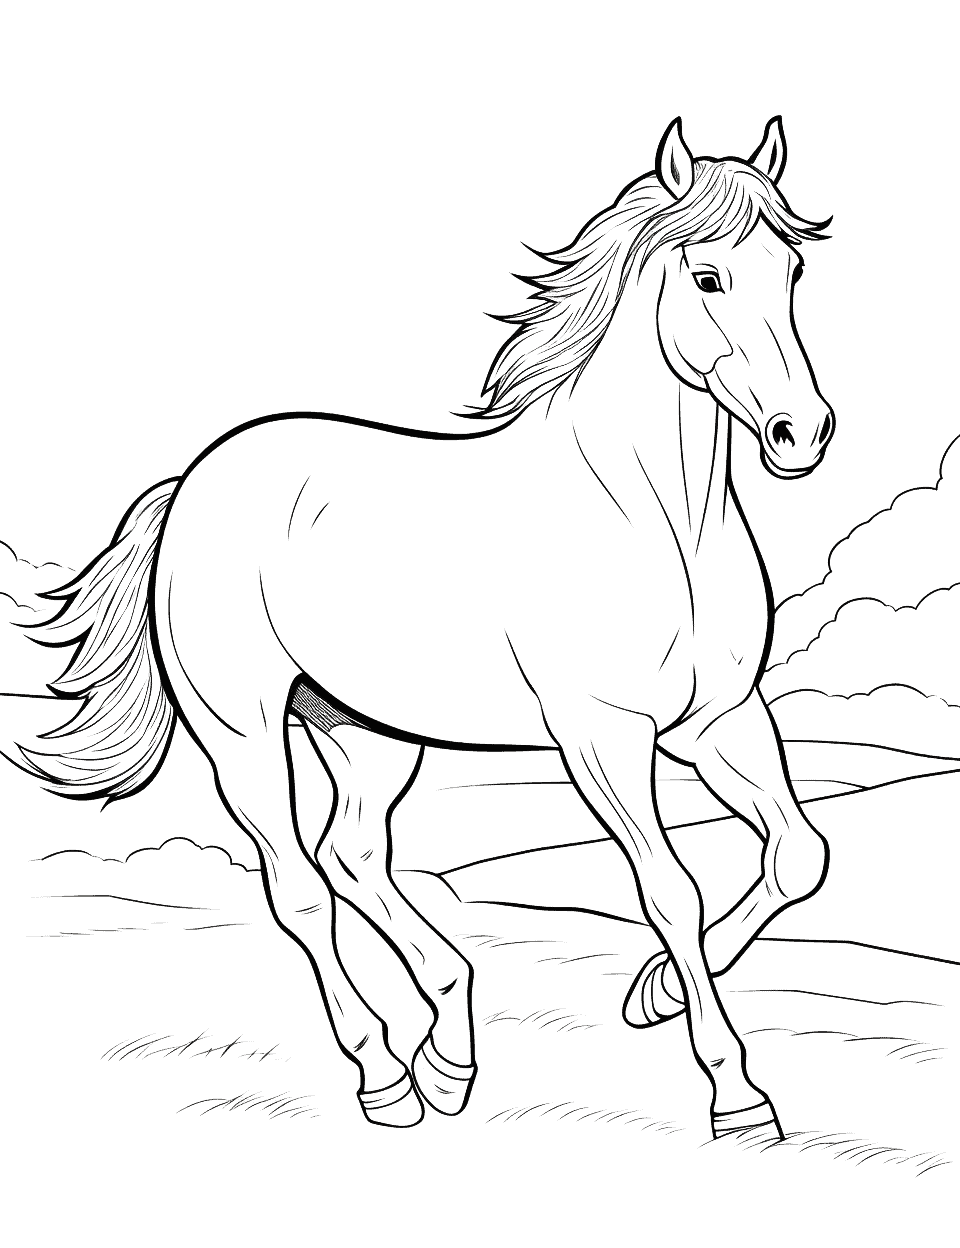 Mustang Running Free Coloring Page - A wild Mustang horse running free across the open plains.